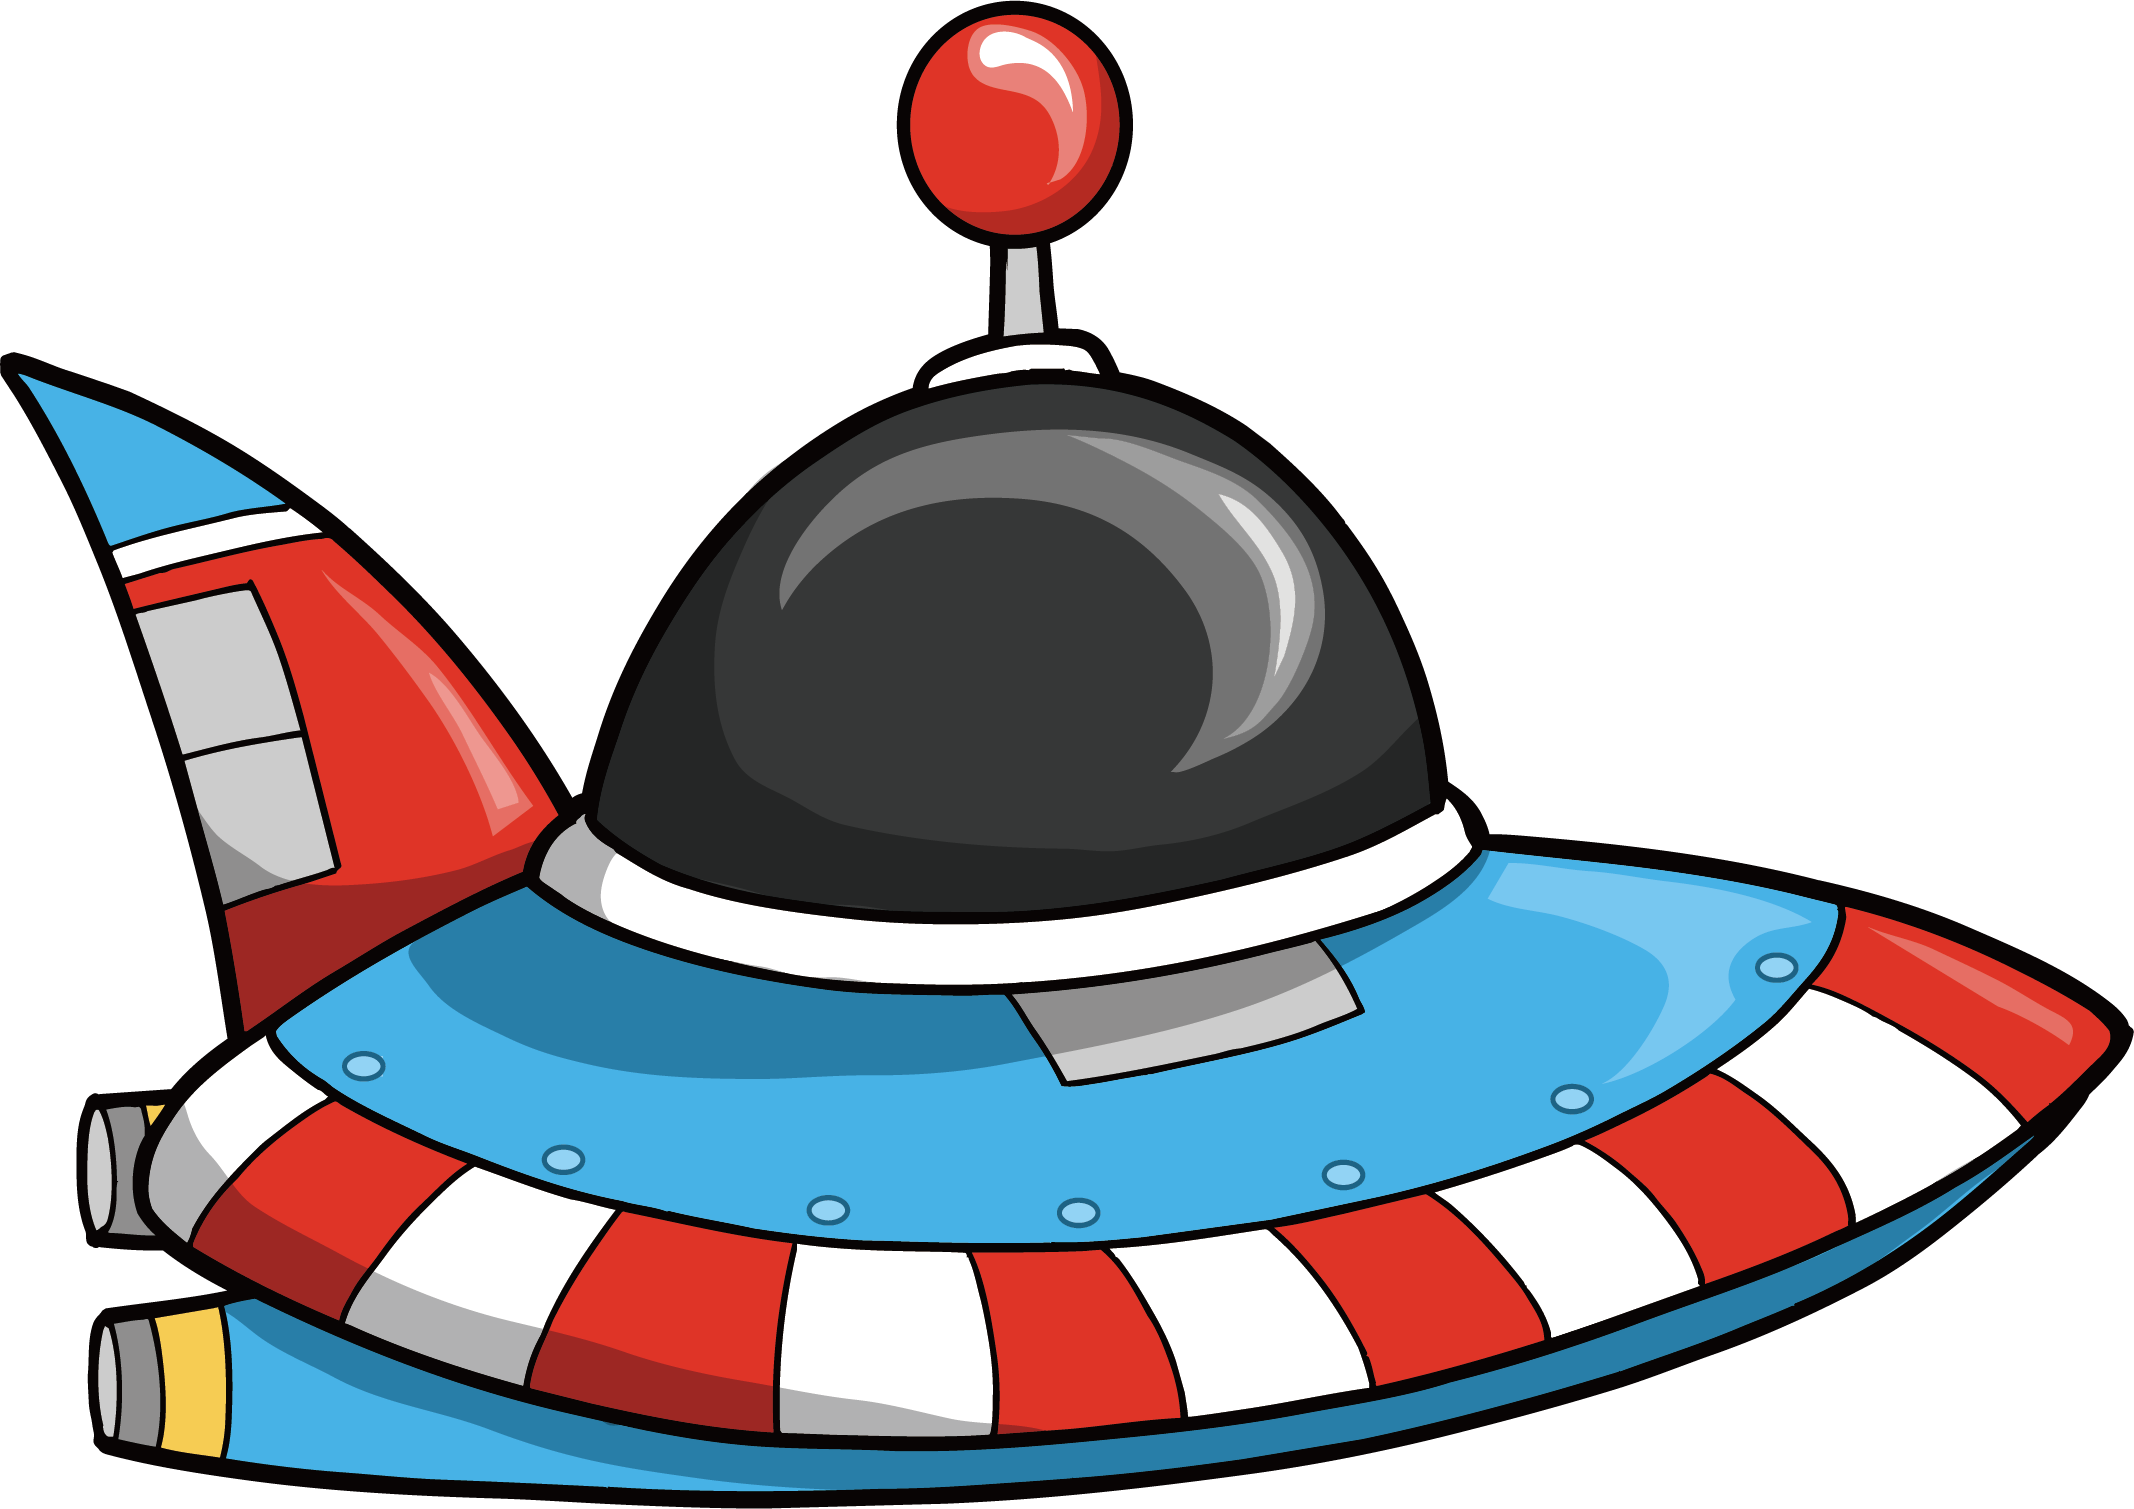 Outer Space Flying Saucer Spacecraft Clip Art - Outer Space Flying Saucer Spacecraft Clip Art (2134x1509)